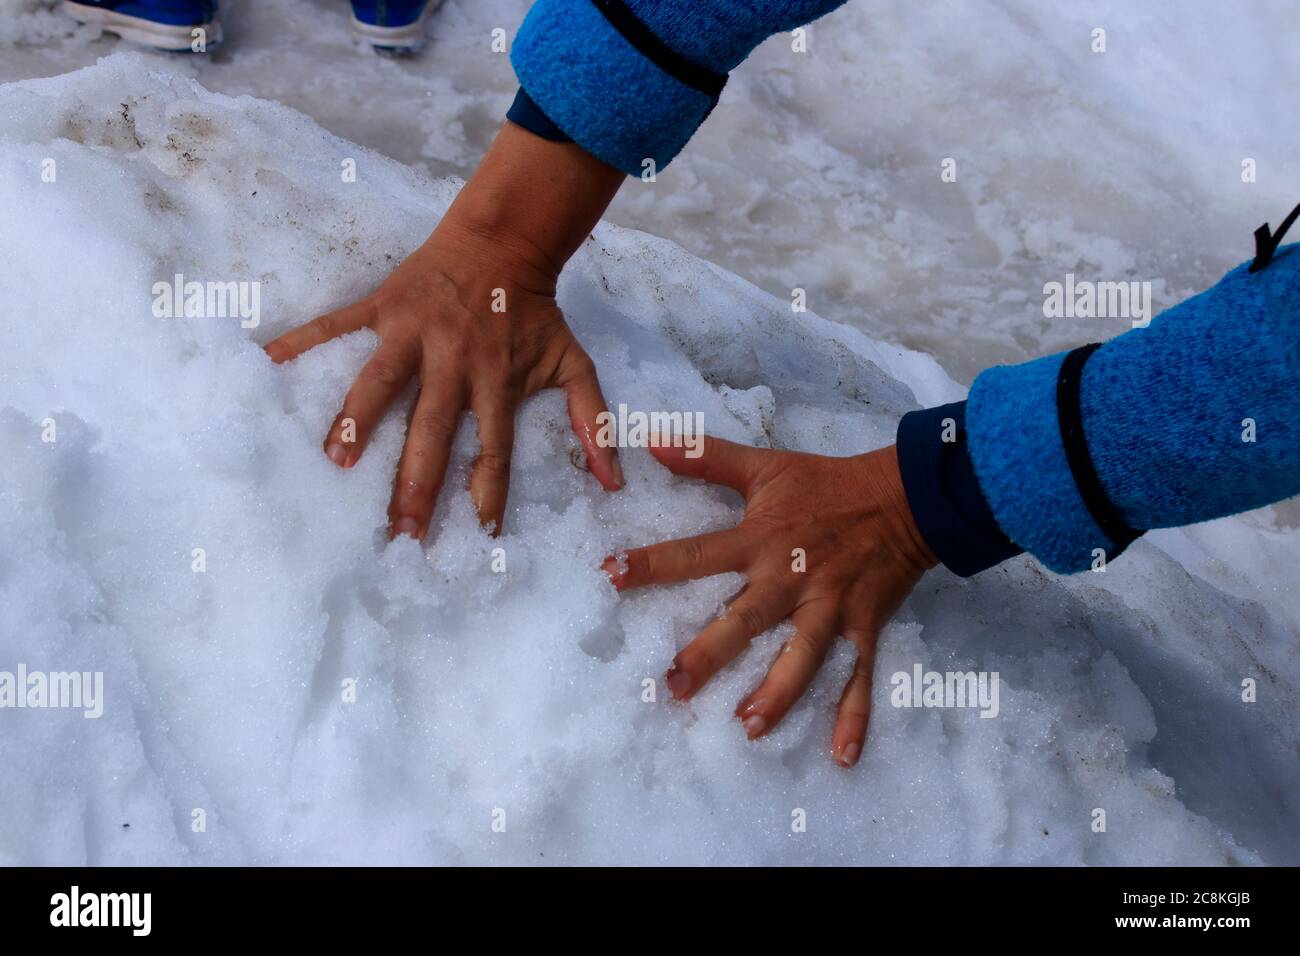 2 hands reach into a pile of snow Stock Photo